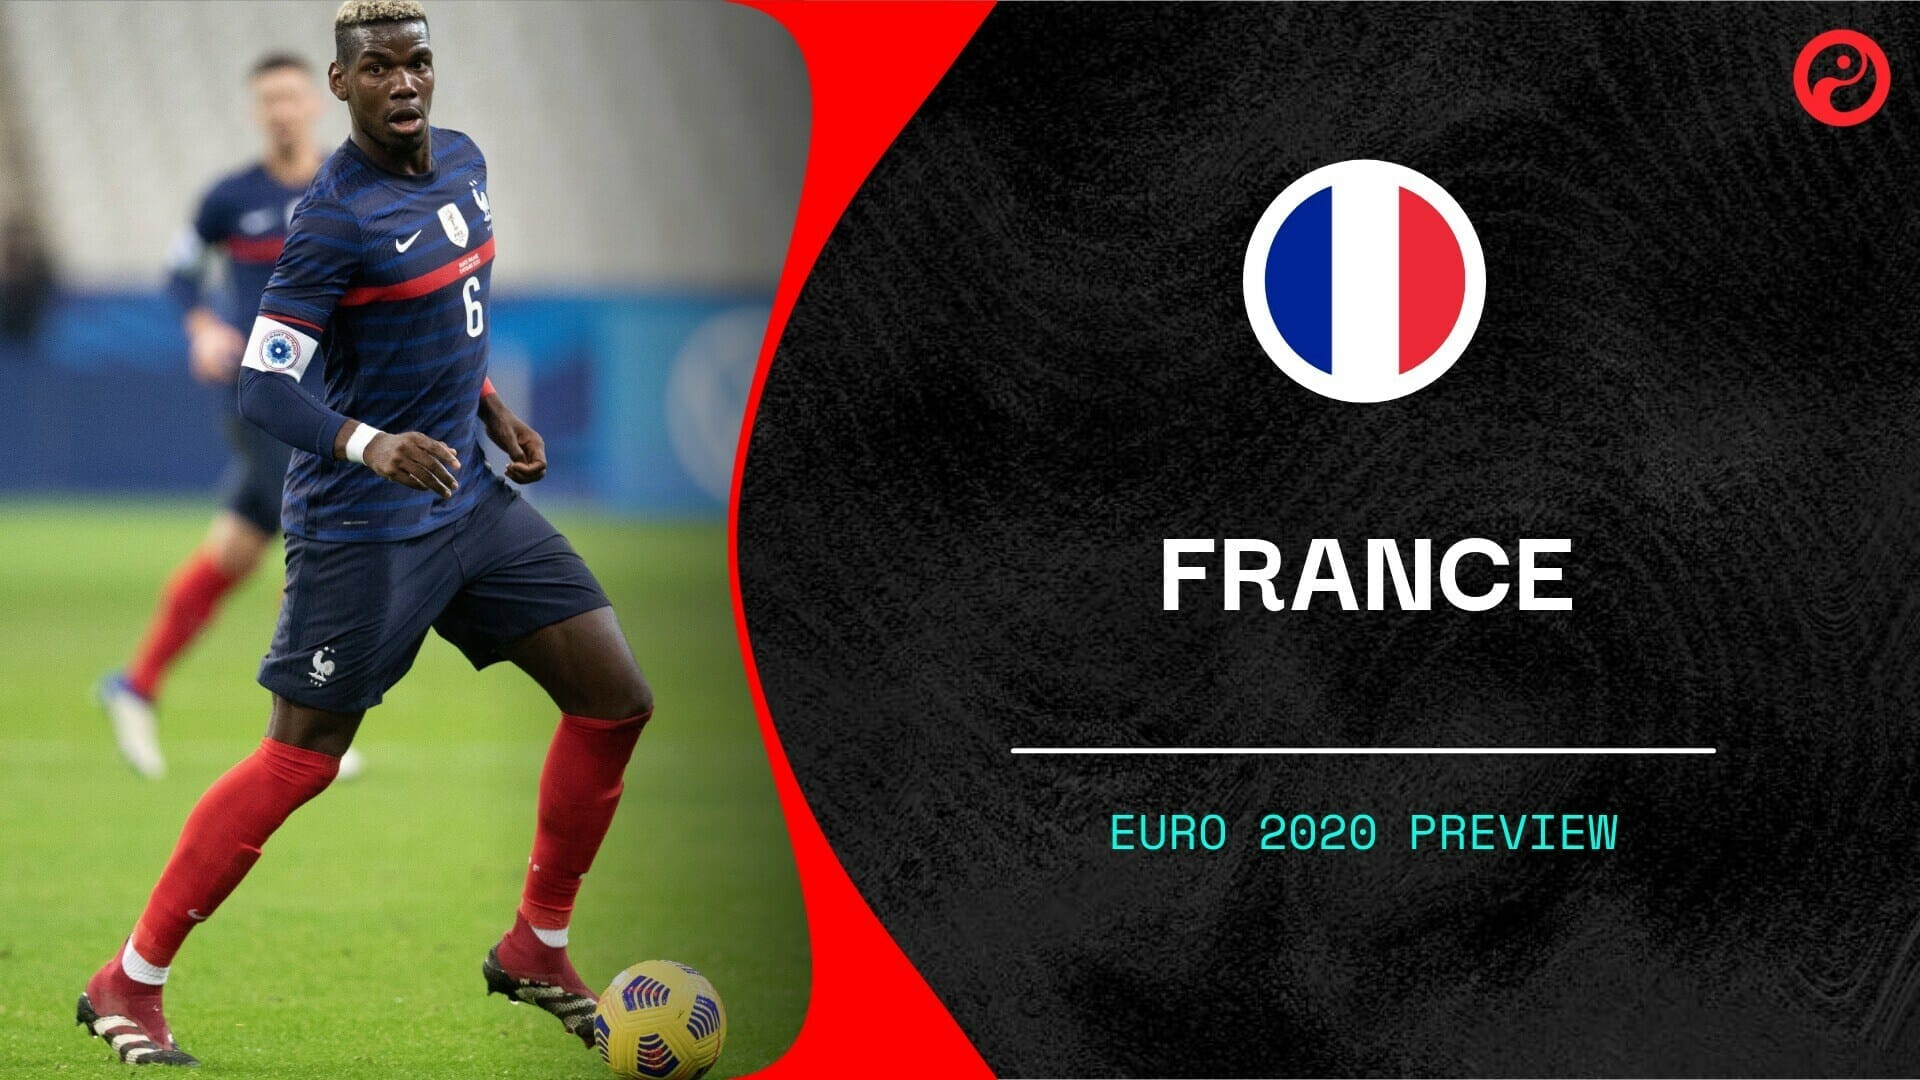 France Euro 2020: Schedule Fixtures, Full Squad List, Key Players, Manager, Tactics and Predictions